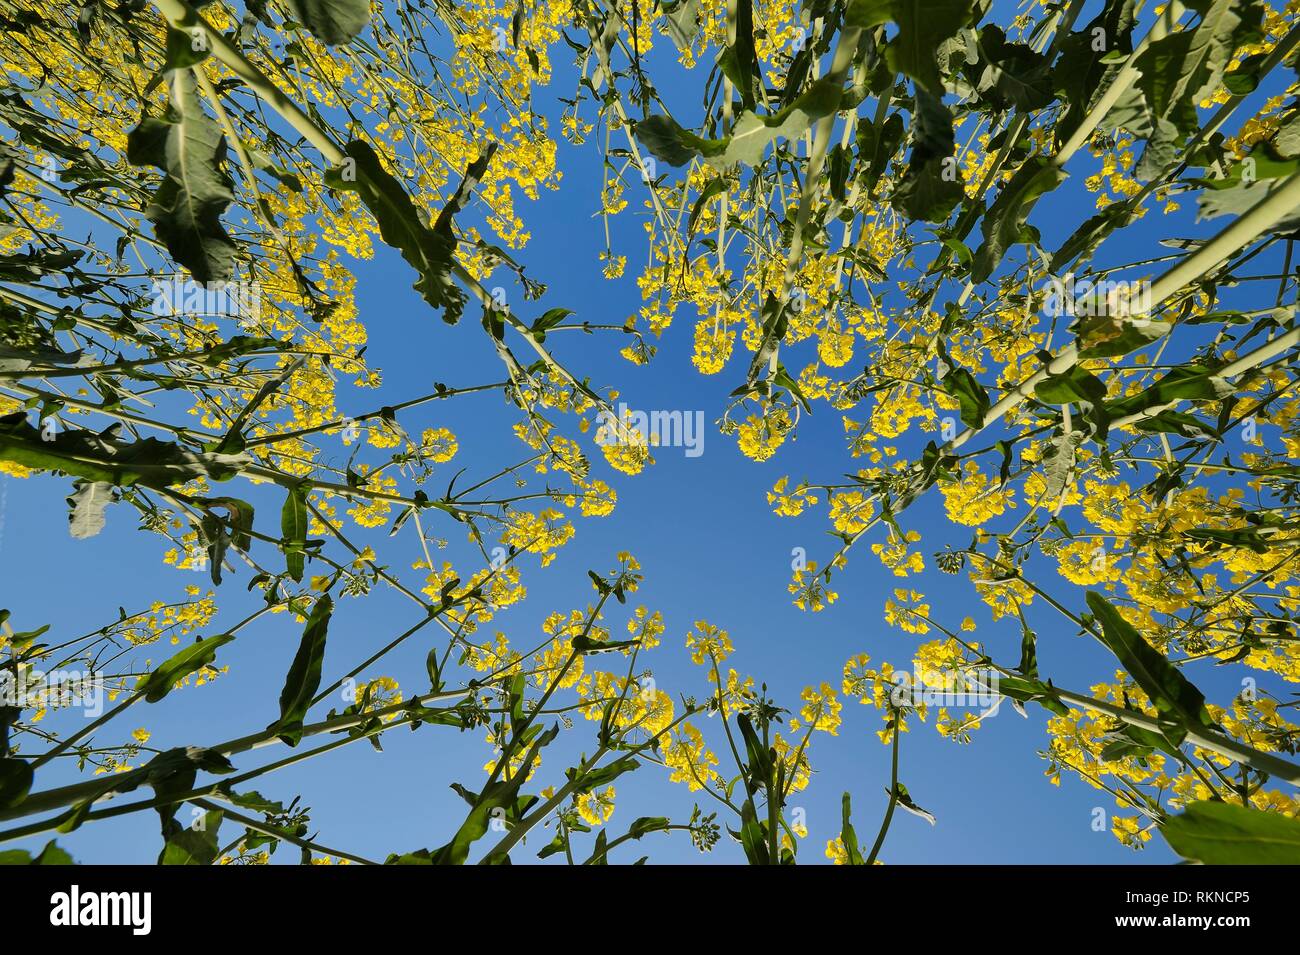 Rapeseed (Brassica napus) ground view in field with clear blue sky. Bavaria, Germany. Stock Photo